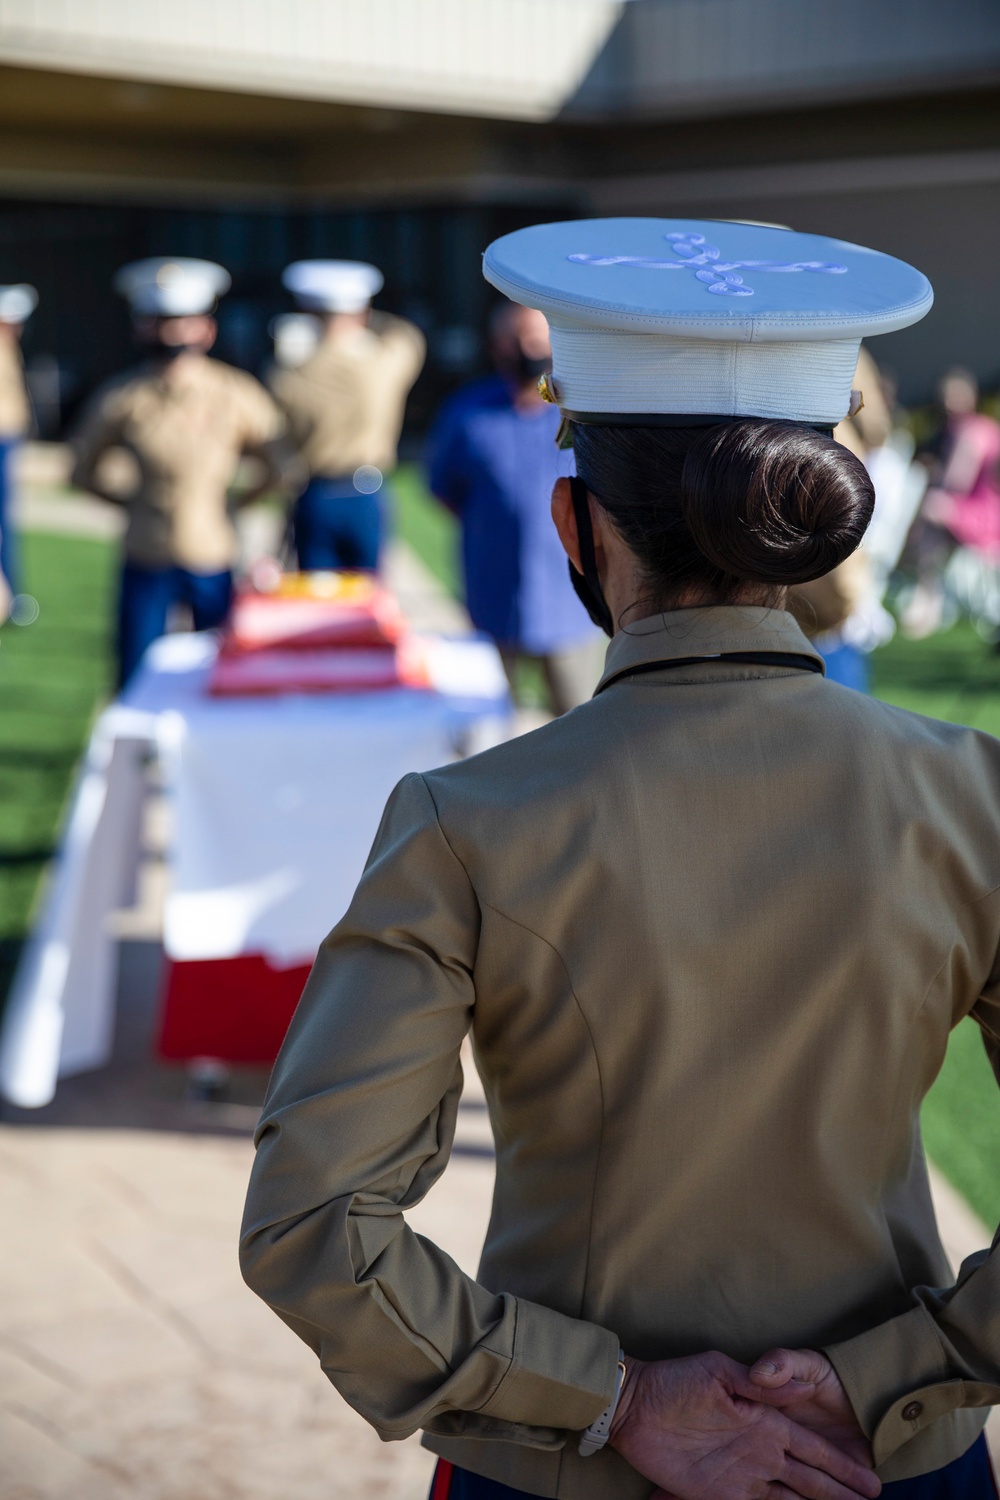 1st Network Battalion hosts unit’s first Marine Corps cake cutting